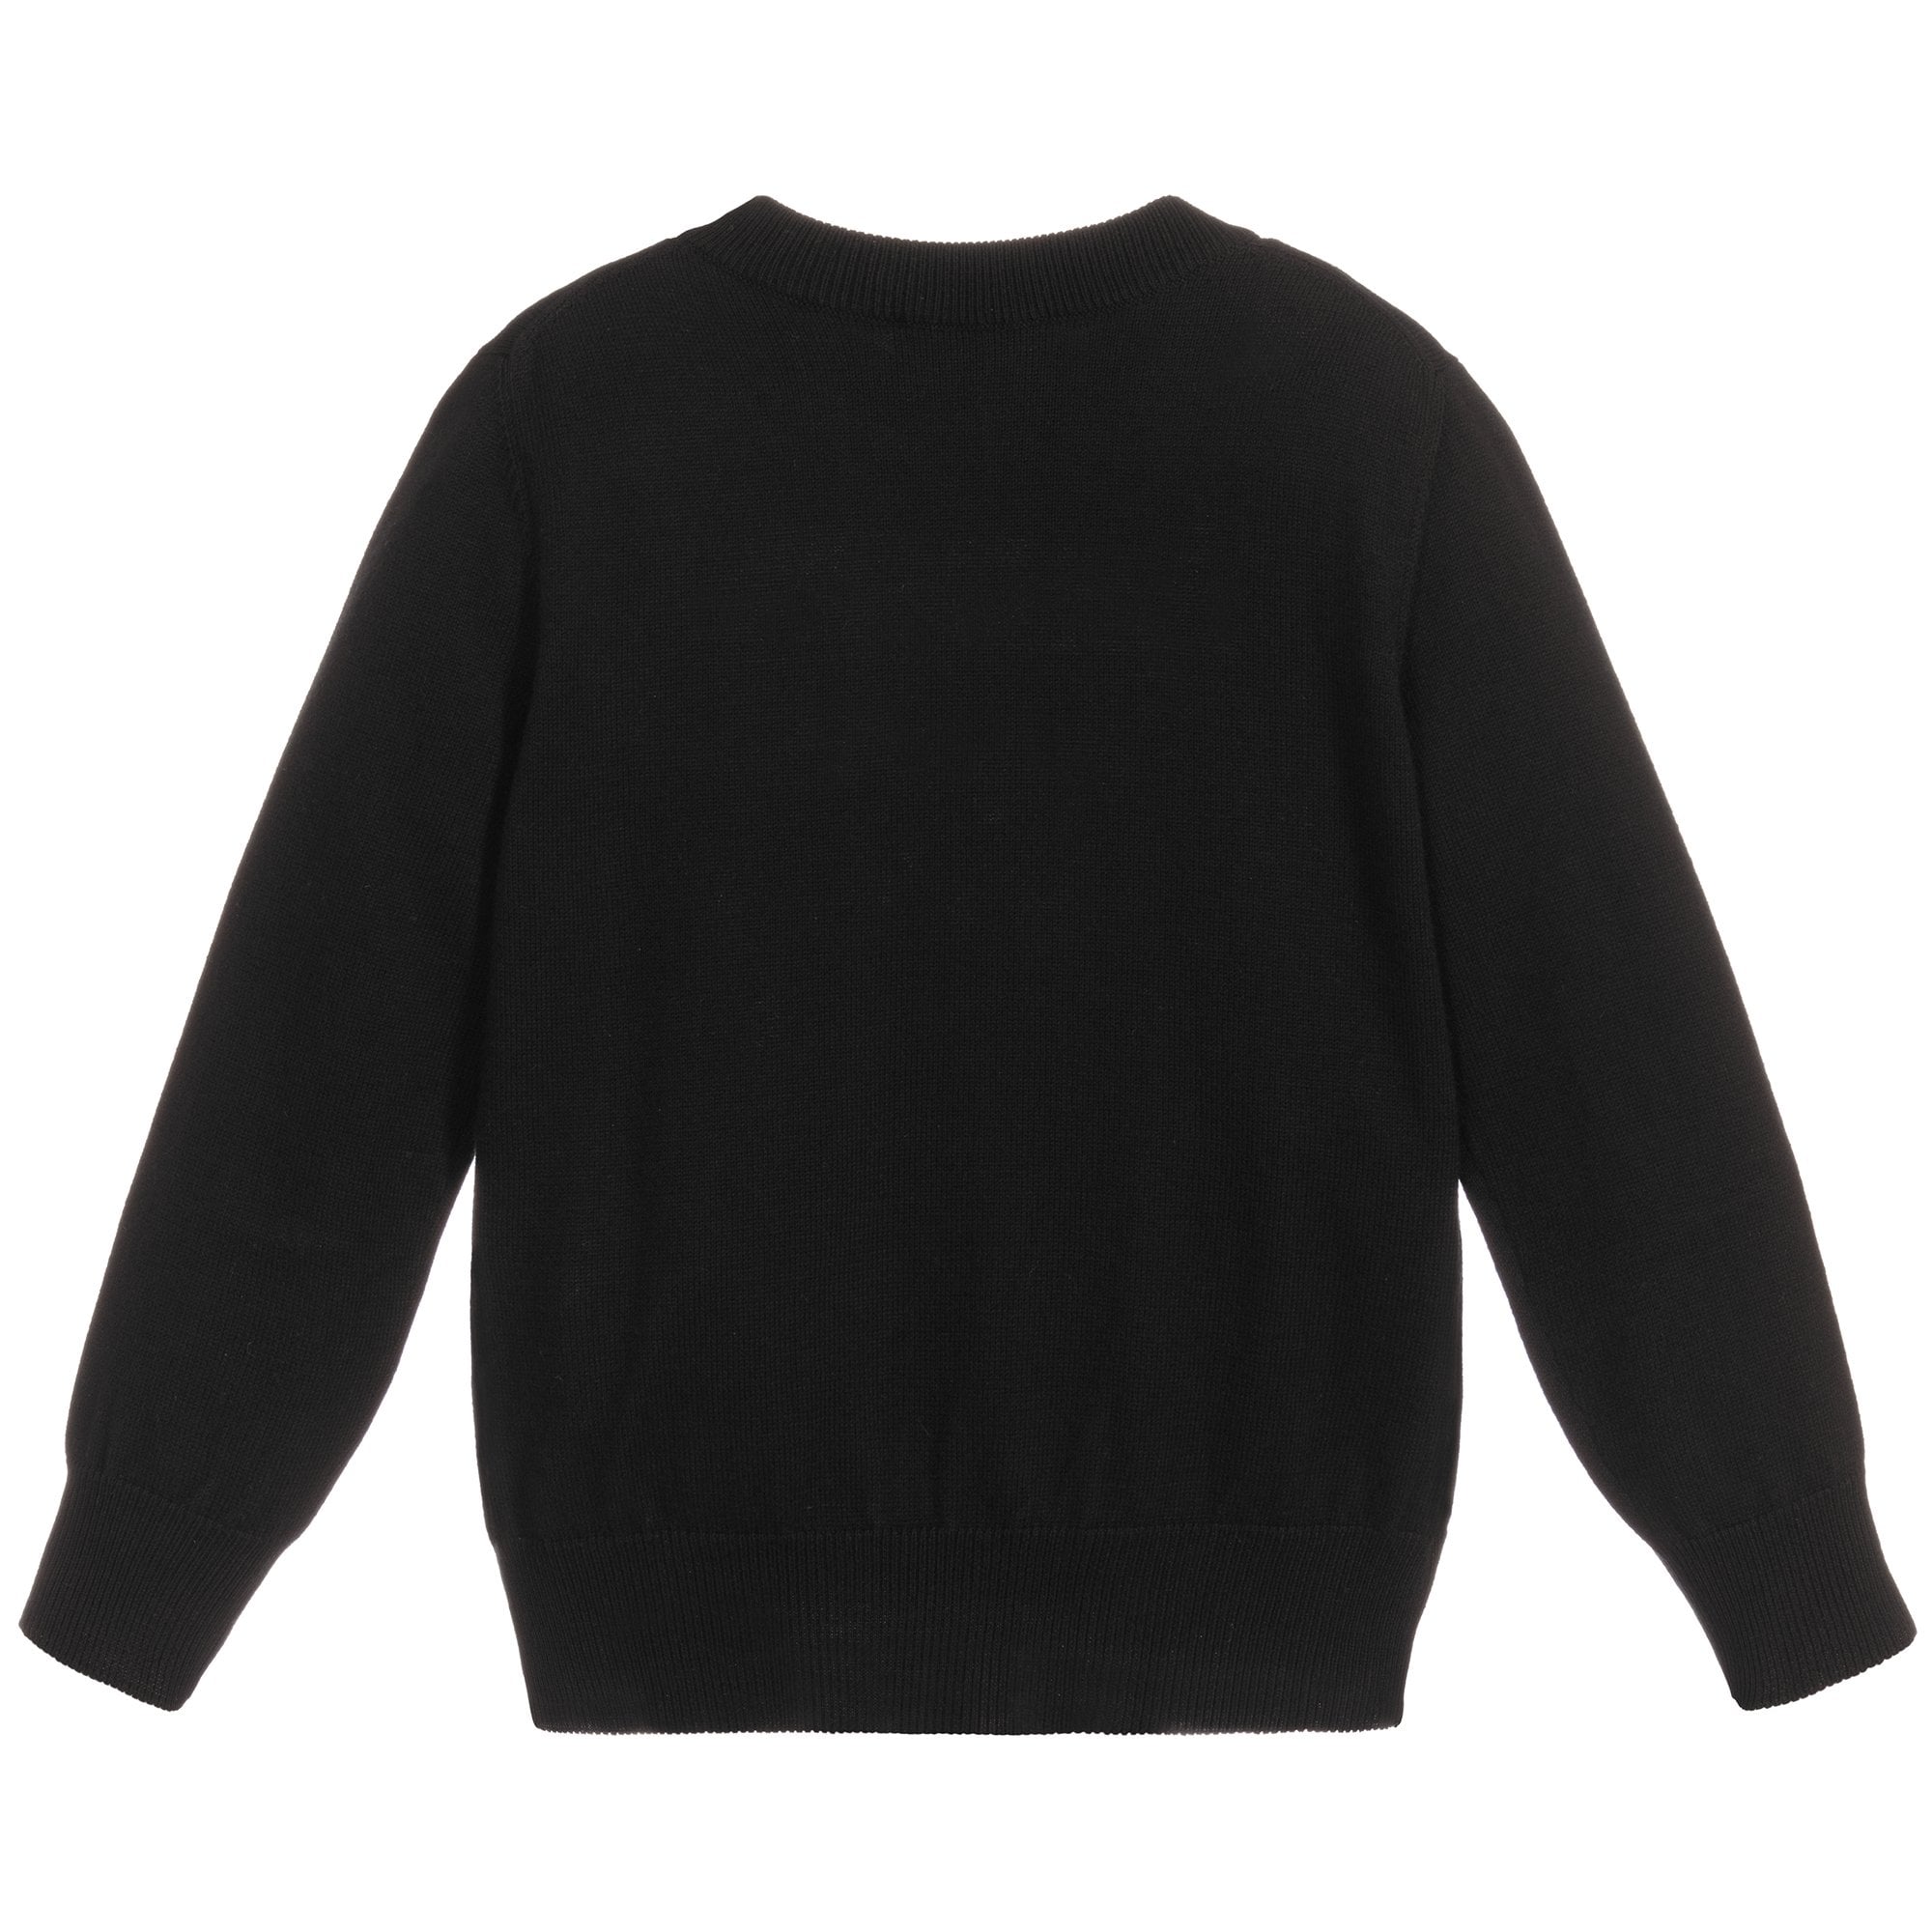 Young Versace Boys Logo Knitted Jumper Black